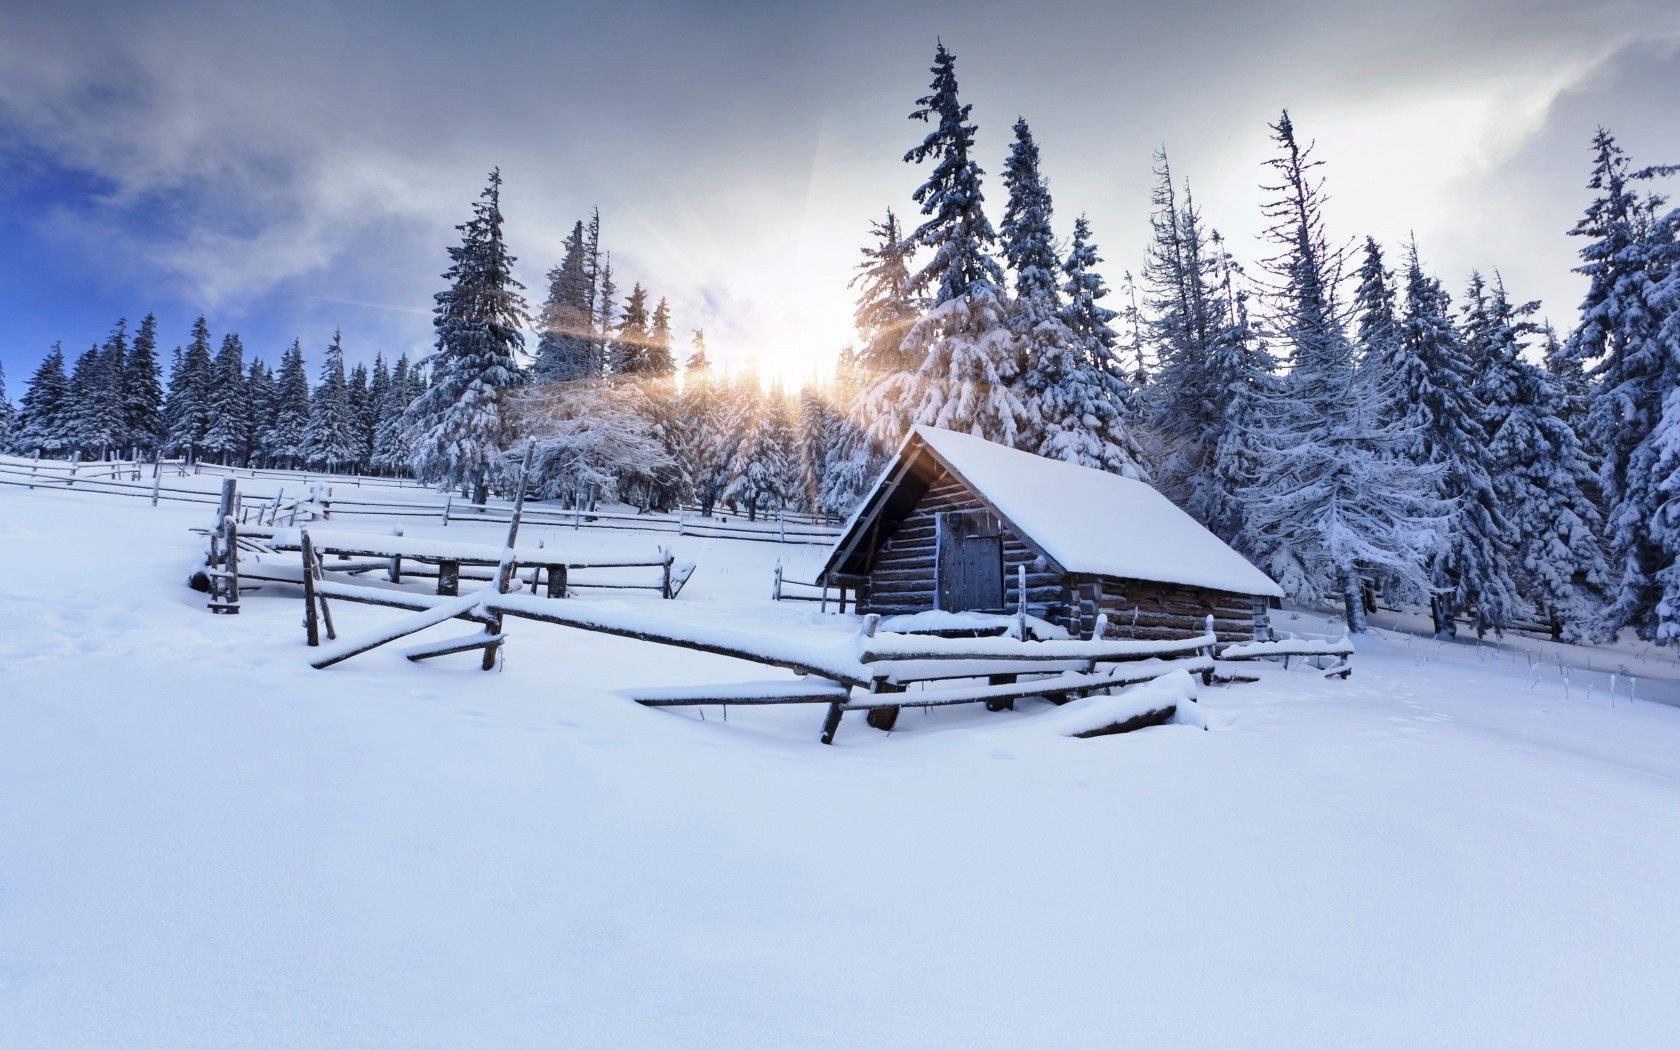 The cabin woods winter barn fence. Android wallpapers for free.